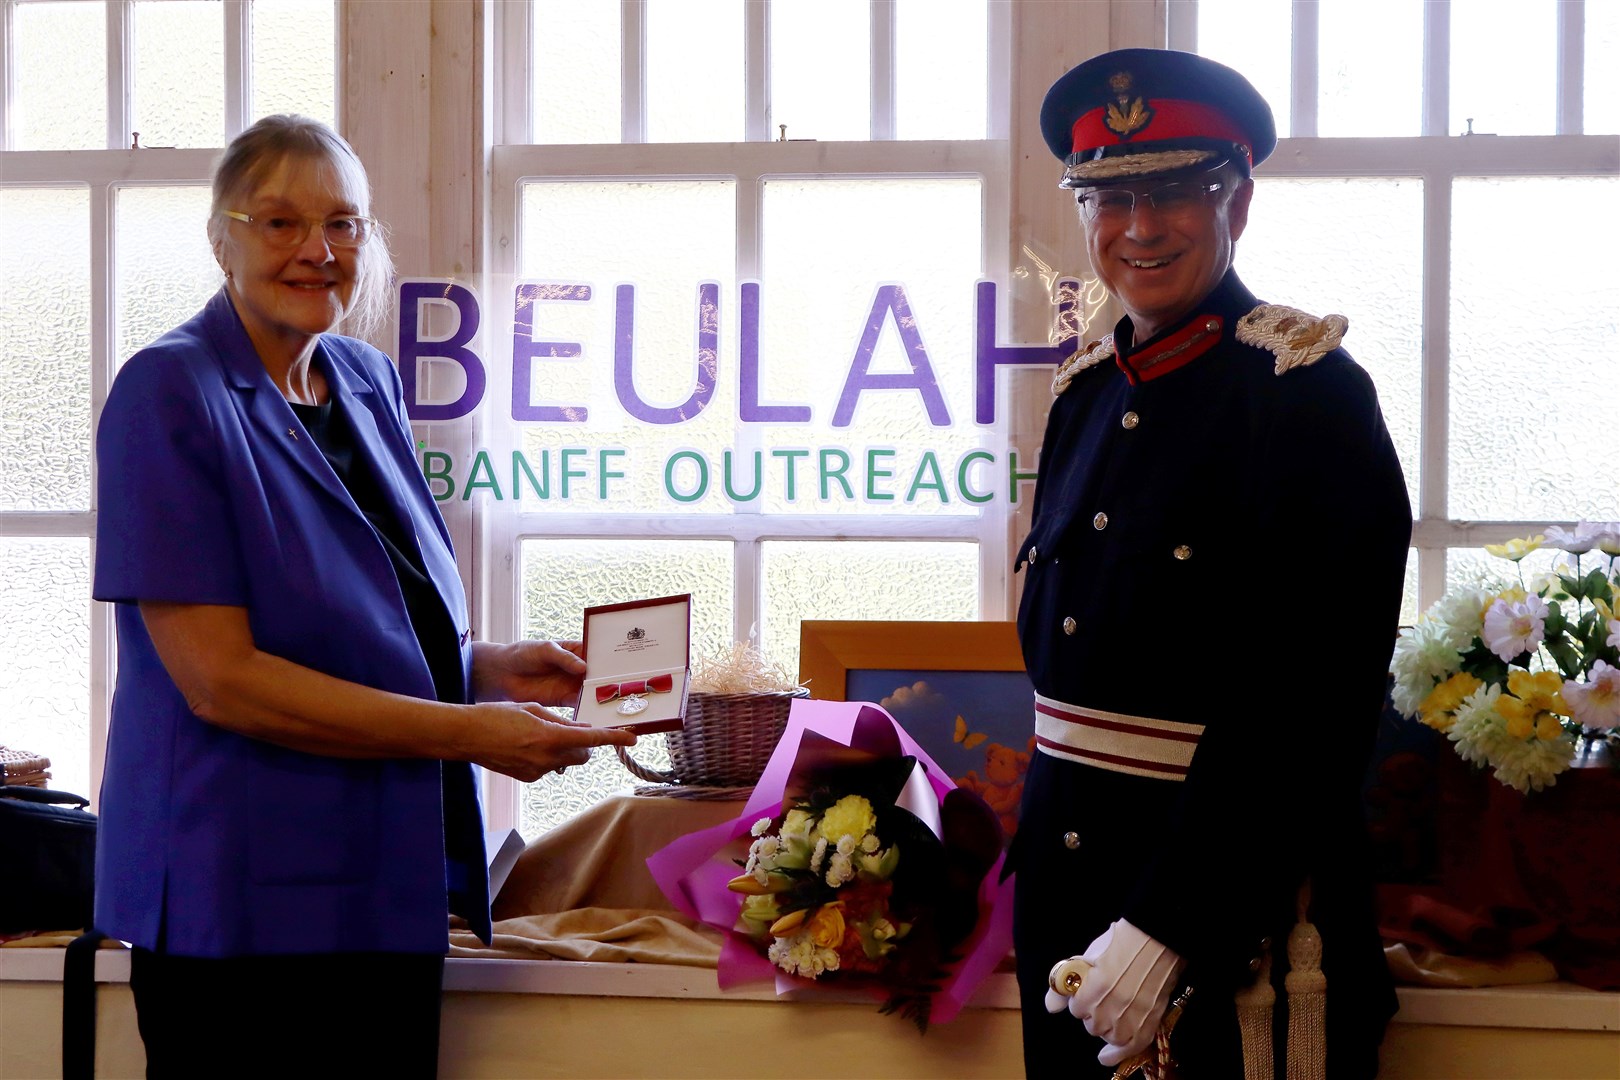 Jenny Lee BEM, Beulah drop-in café founder, with Banffshire Lord Lieutenant Andrew Simpson at Banff's St Andrew's Episcopal Church Hall.